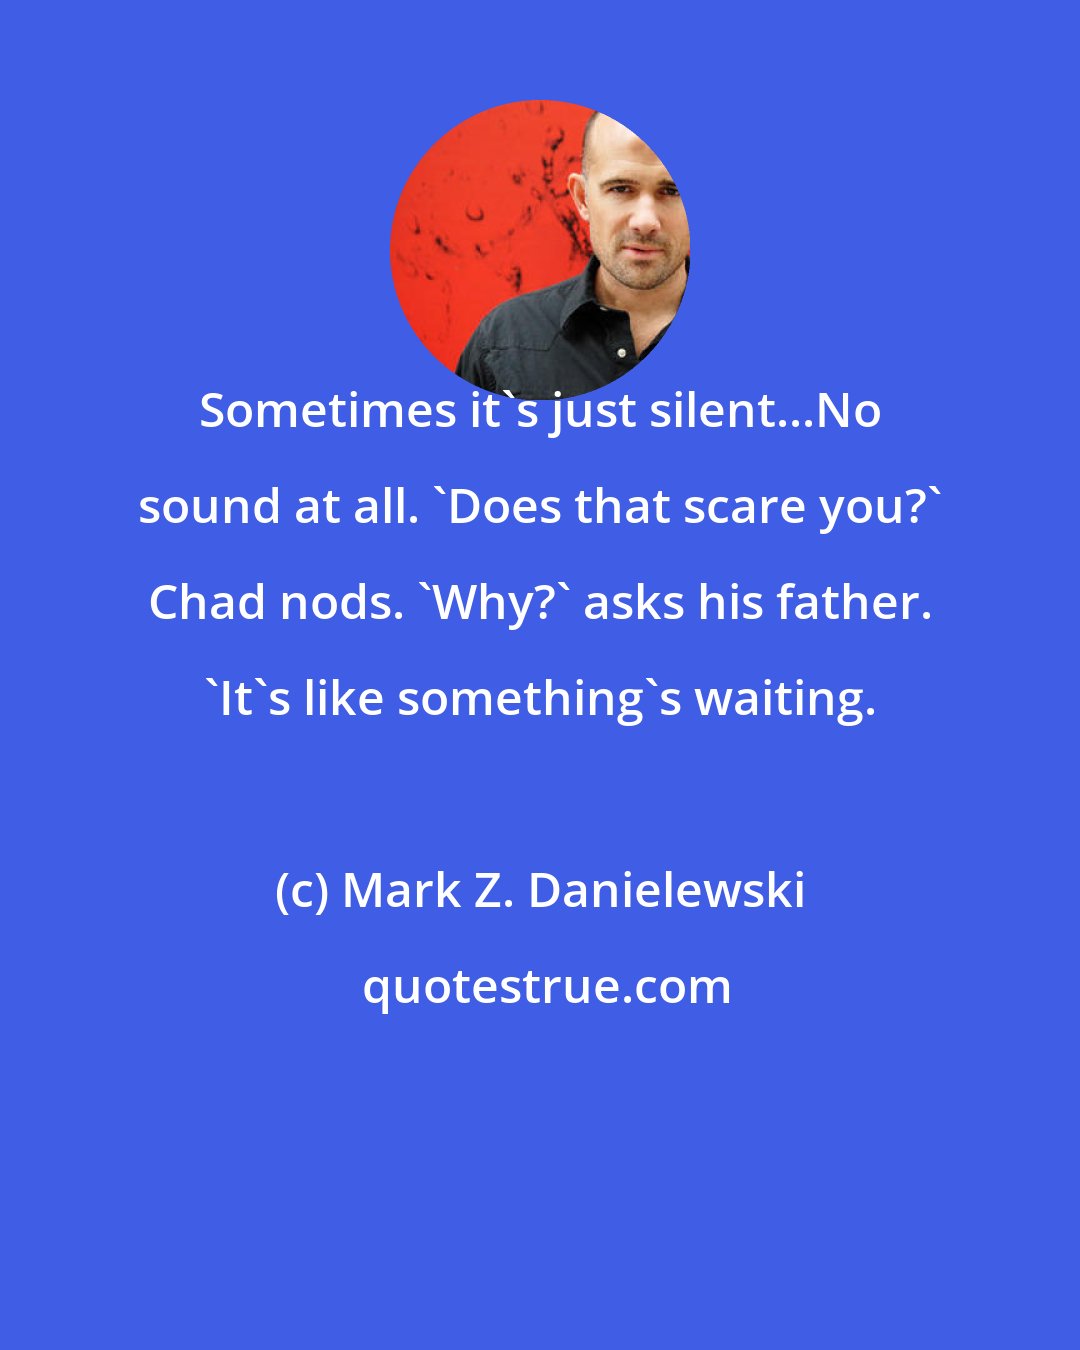 Mark Z. Danielewski: Sometimes it's just silent...No sound at all. 'Does that scare you?' Chad nods. 'Why?' asks his father. 'It's like something's waiting.